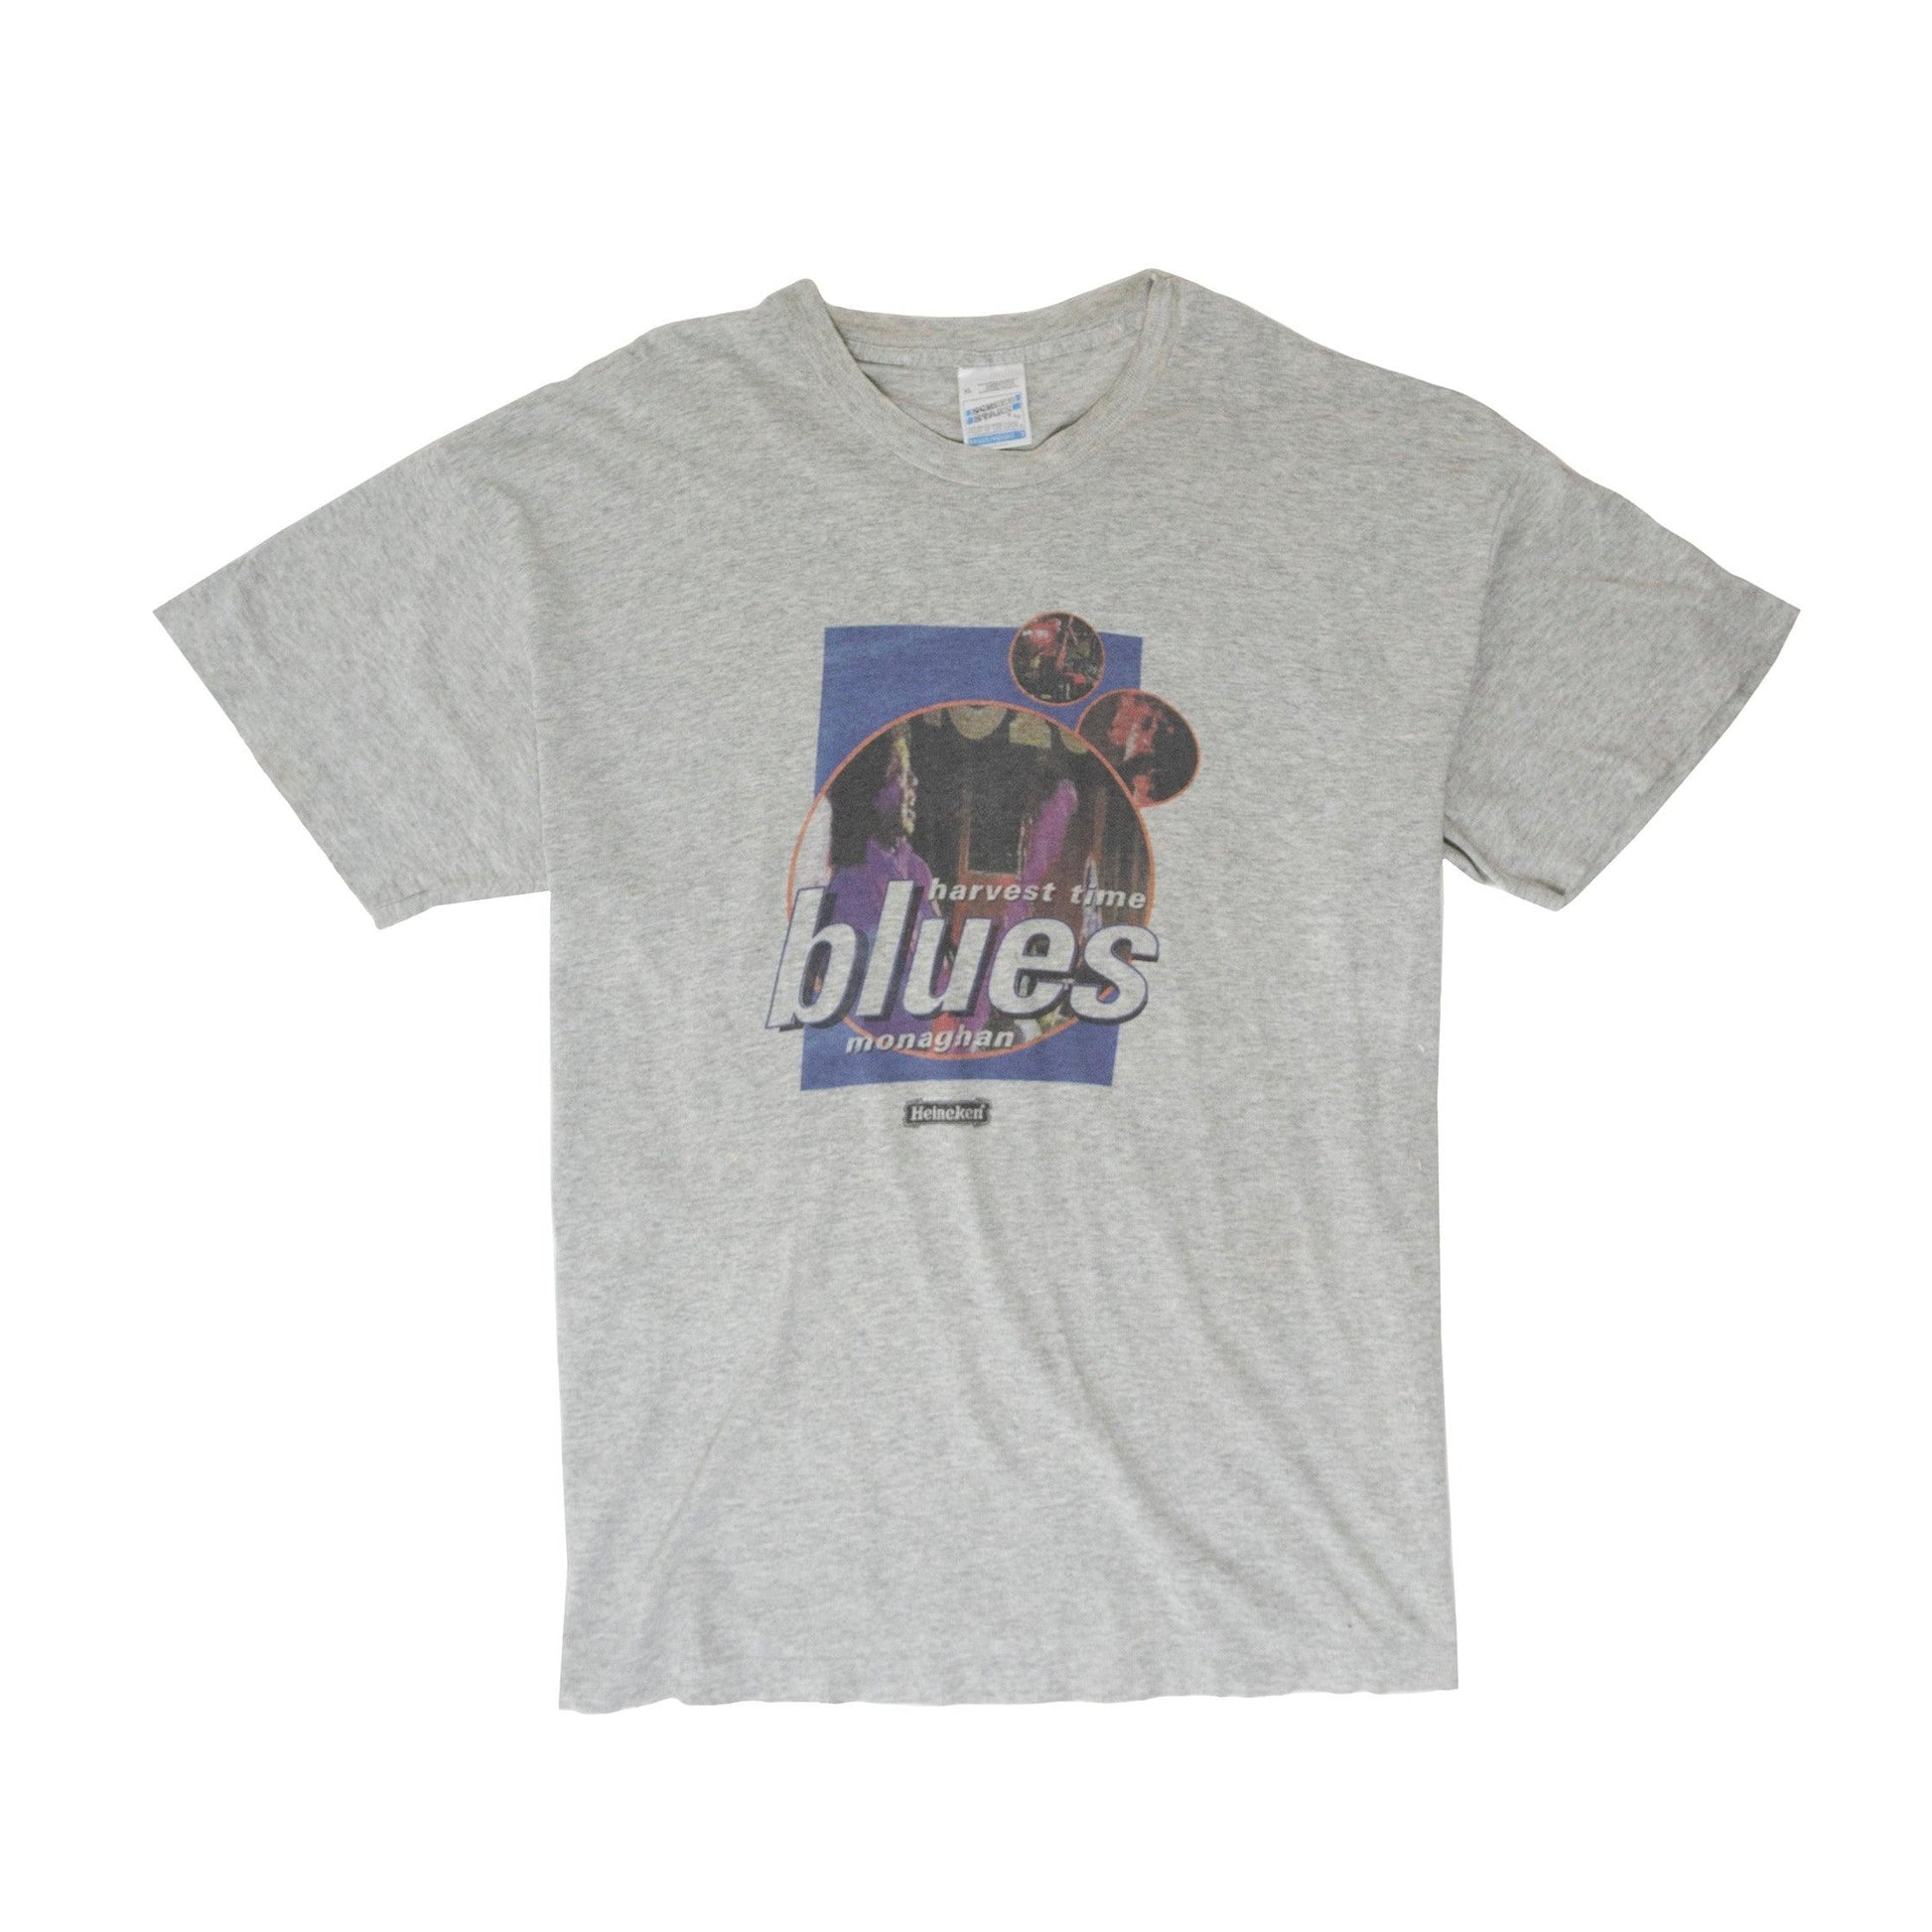 Monaghan Blues Festival Graphic Tee - Known Source